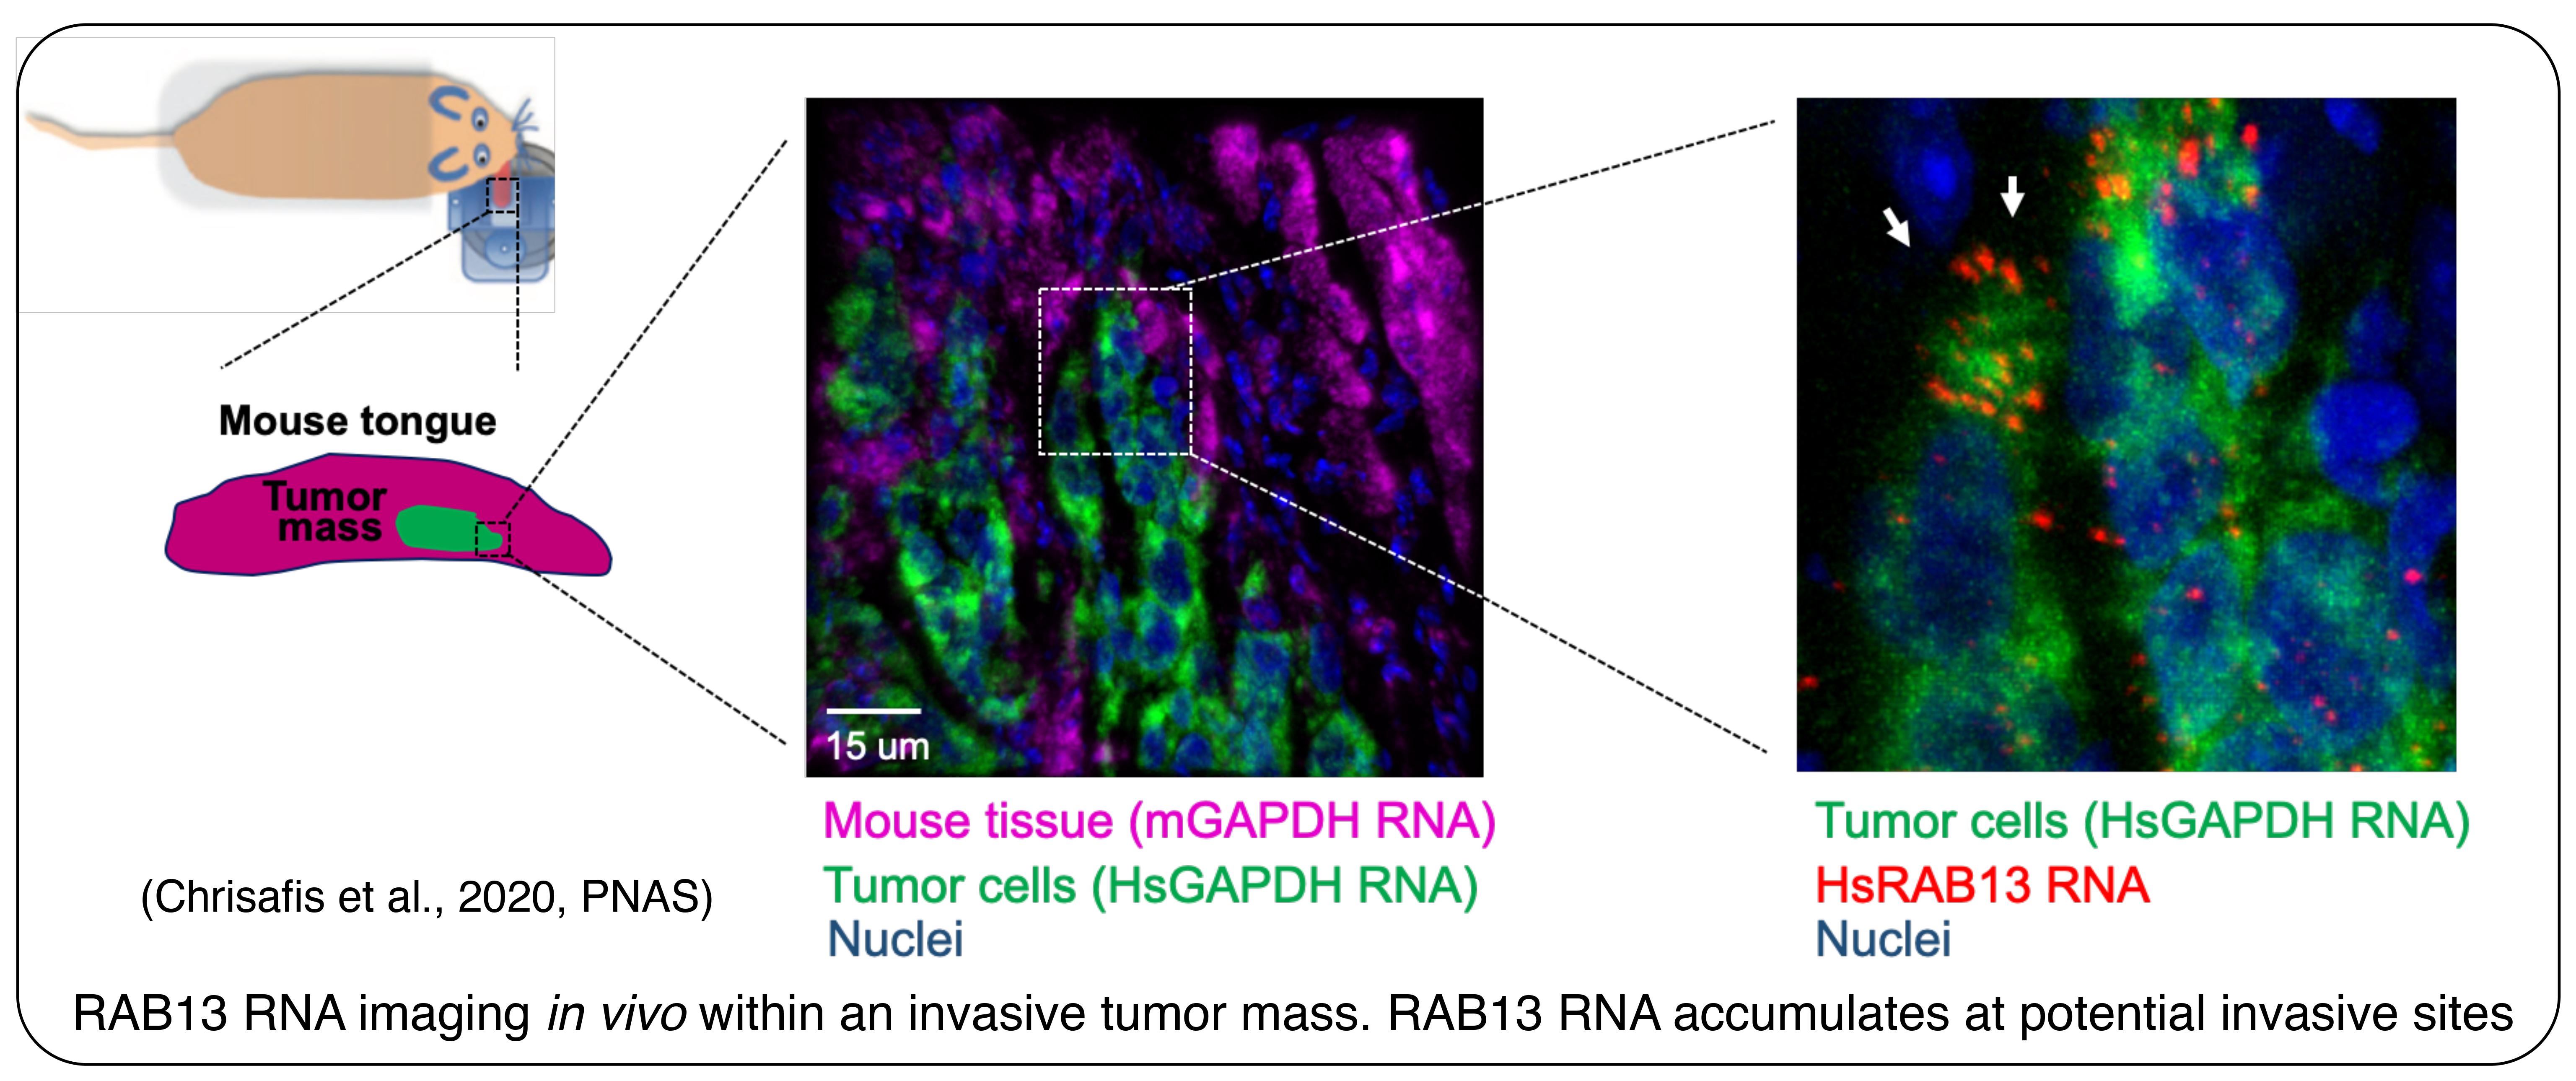 RAB13 RNA imaging in vivo within an invasive tumor mass. RAB13 accumulates at potential invasive sites.